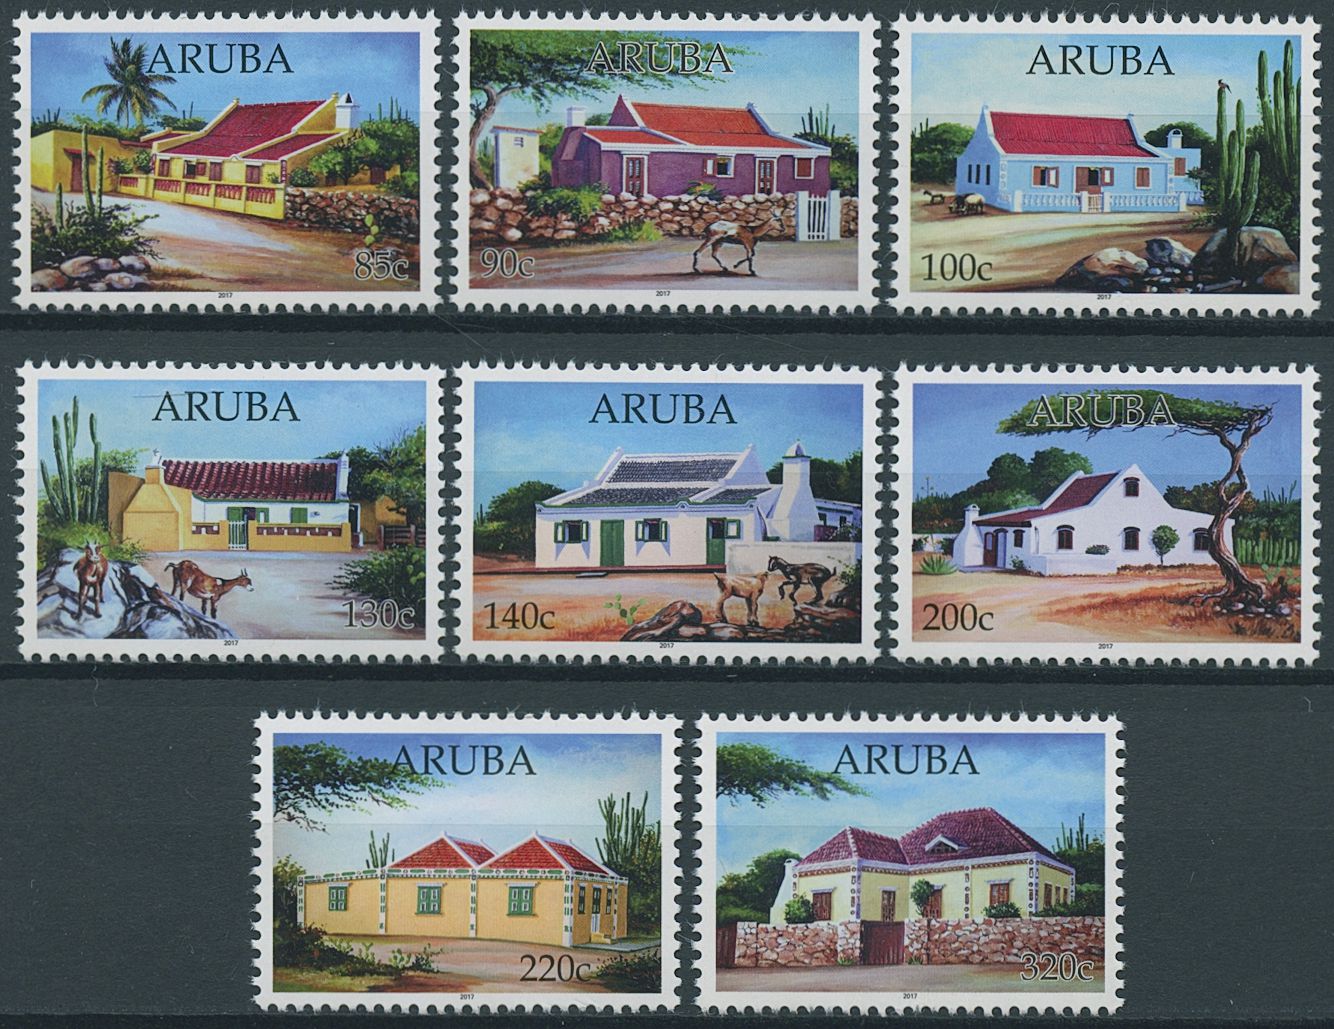 Aruba 2017 MNH Architecture Stamps Typical Houses Trees Goats Buildings 8v Set